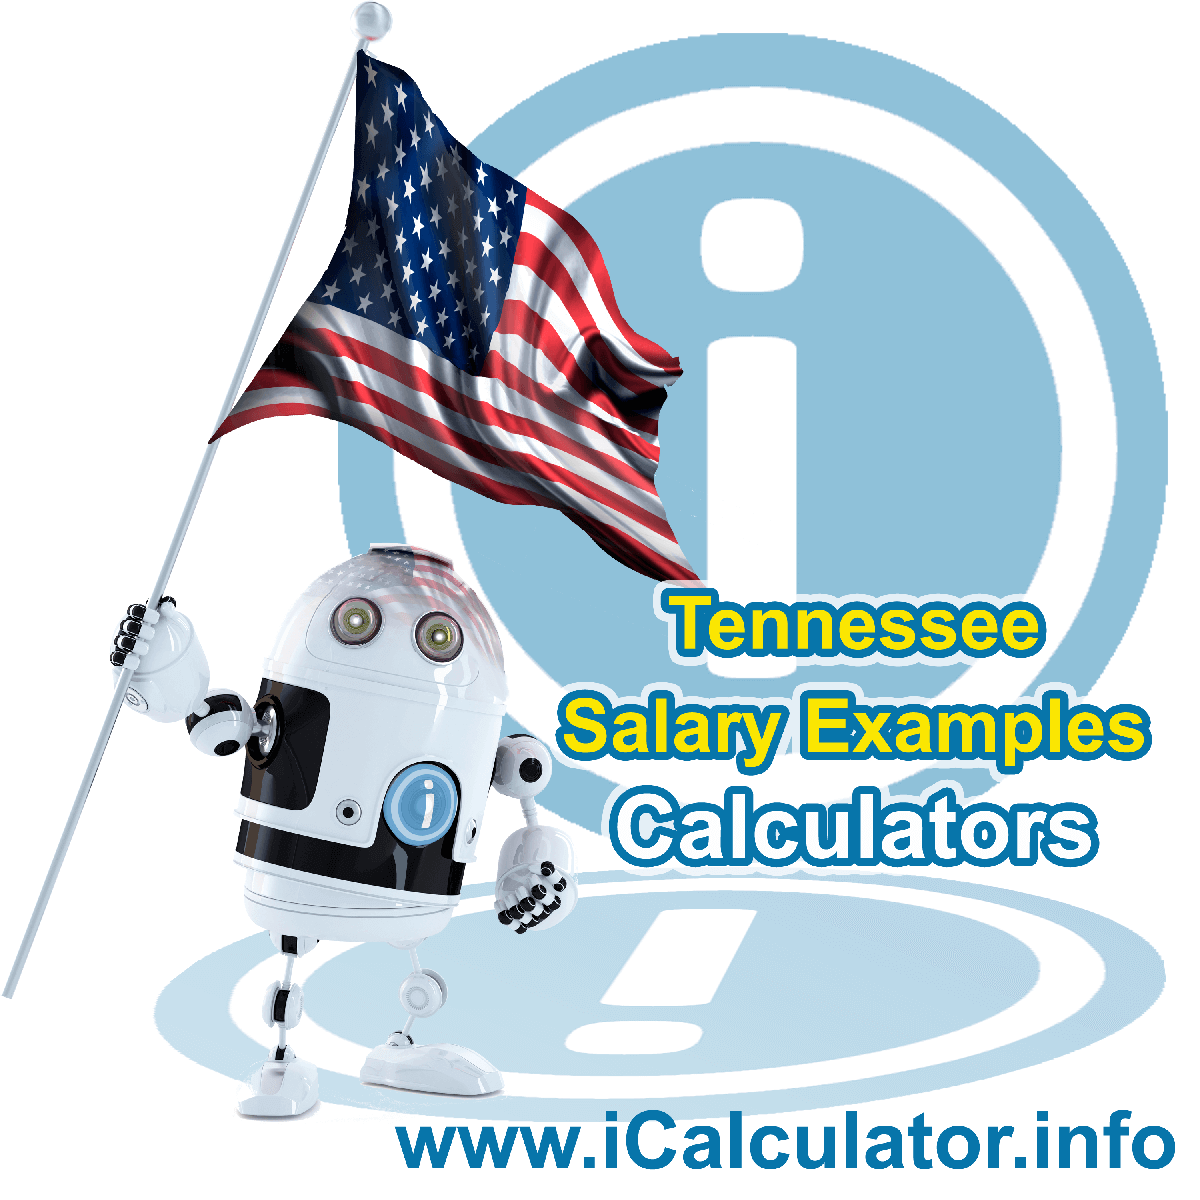 Tennessee Salary Example for $50,000.00 in 2022 | iCalculator™ | $50,000.00 salary example for employee and employer paying Tennessee State tincome taxes. Detailed salary after tax calculation including Tennessee State Tax, Federal State Tax, Medicare Deductions, Social Security, Capital Gains and other income tax and salary deductions complete with supporting Tennessee state tax tables 